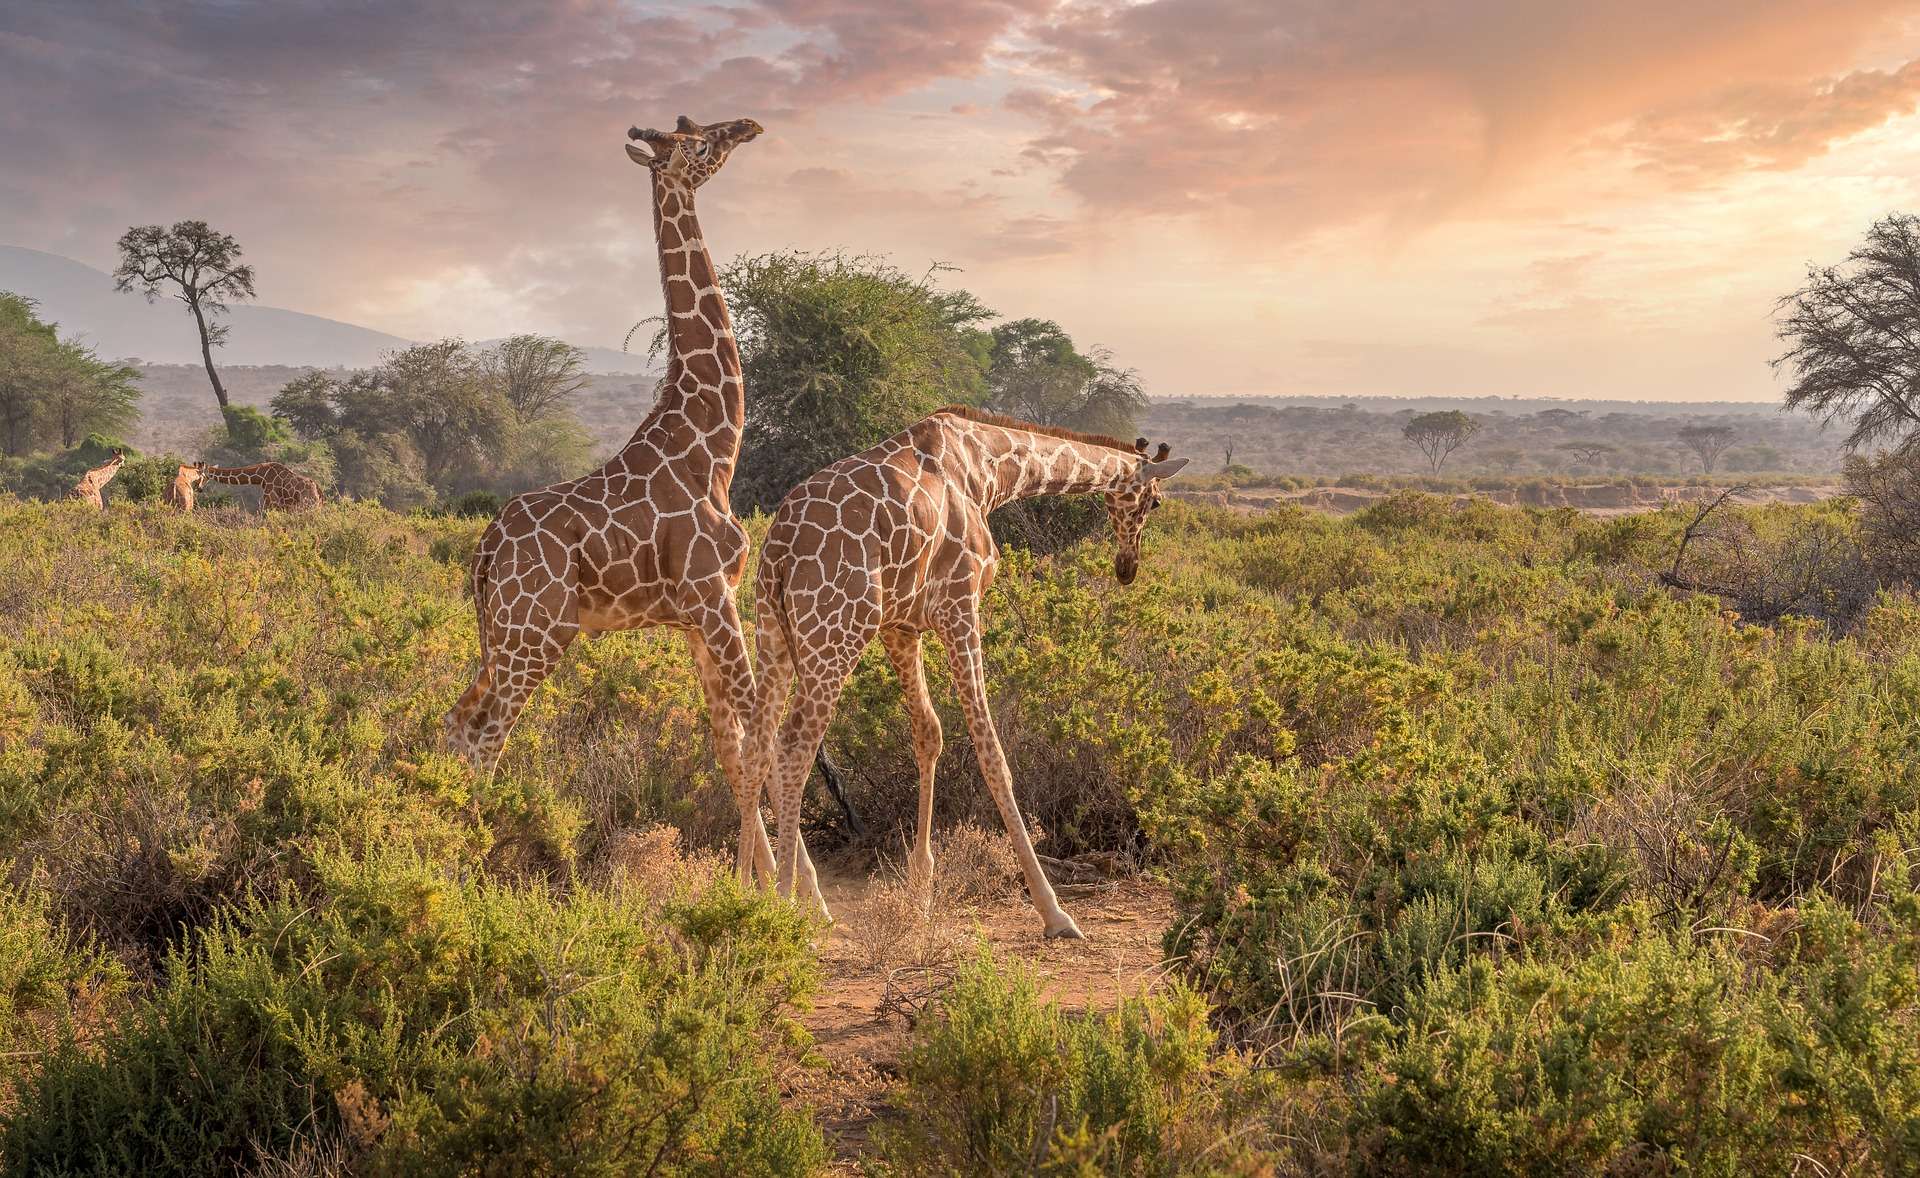 Shaba National Reserve Kenya - Travel Guide, Packages, & Cost